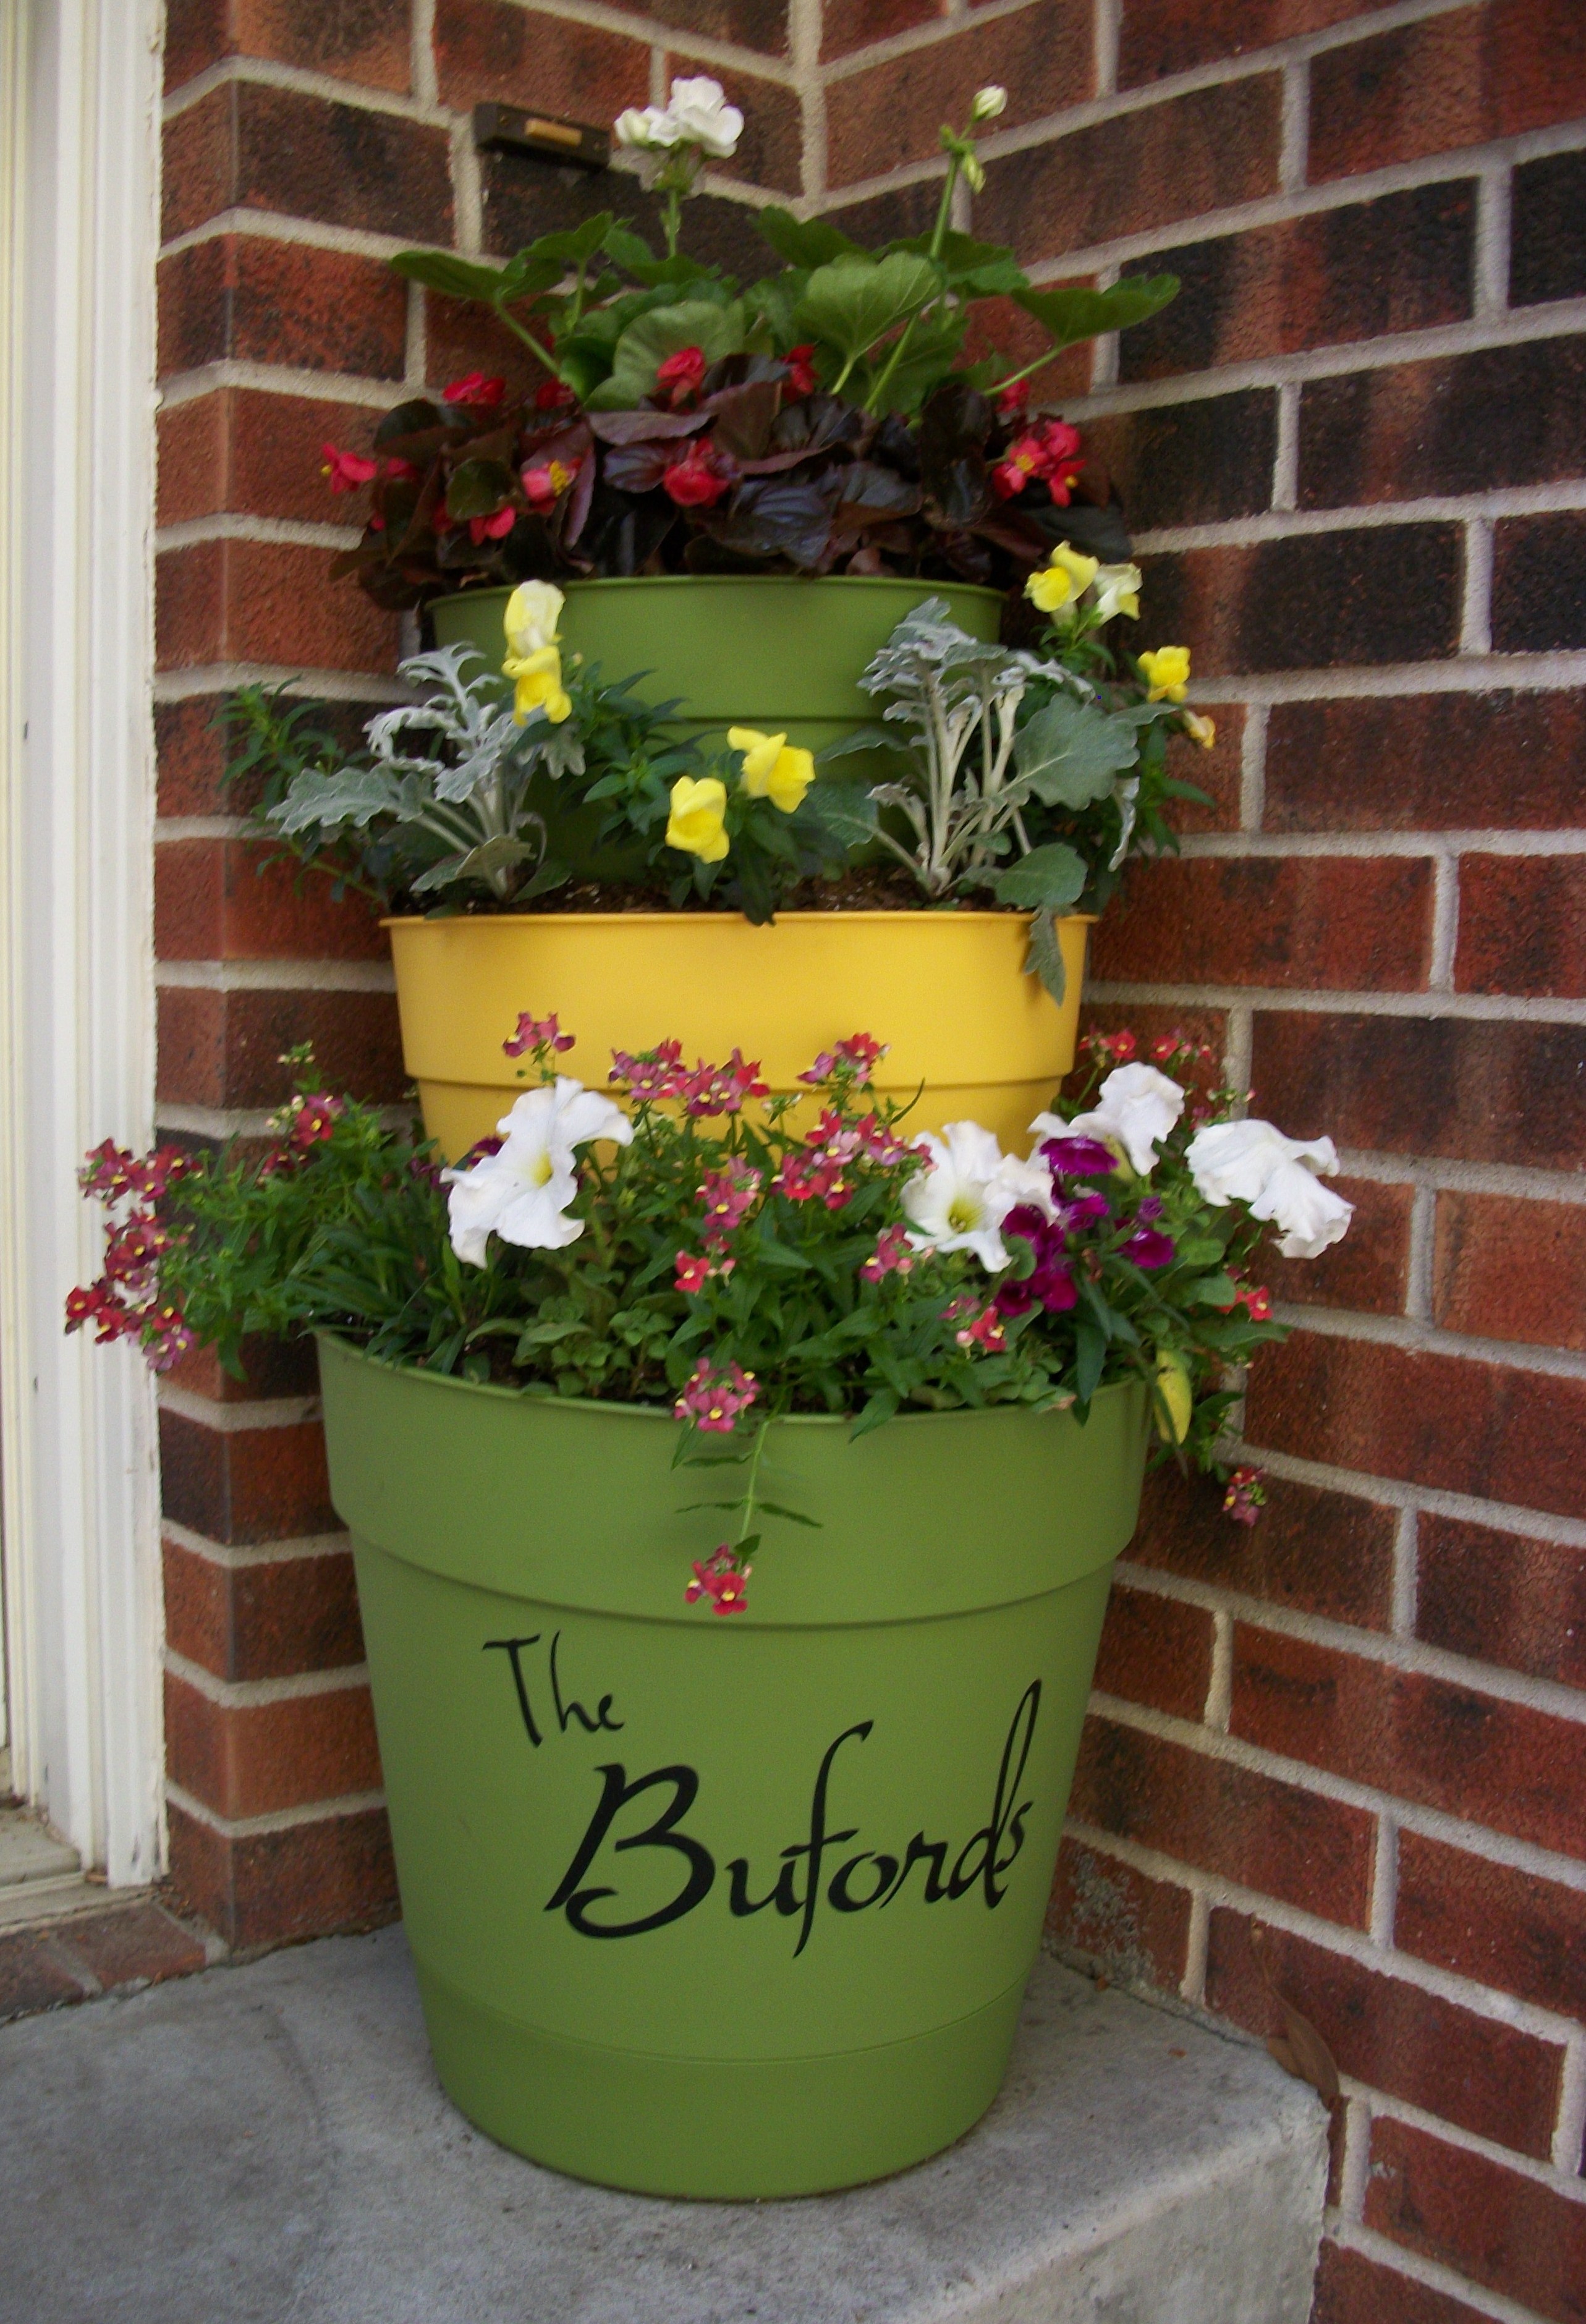 Tiered Planter Ideas That You Can Easily Make With Clay Pots - Page 2 of 2